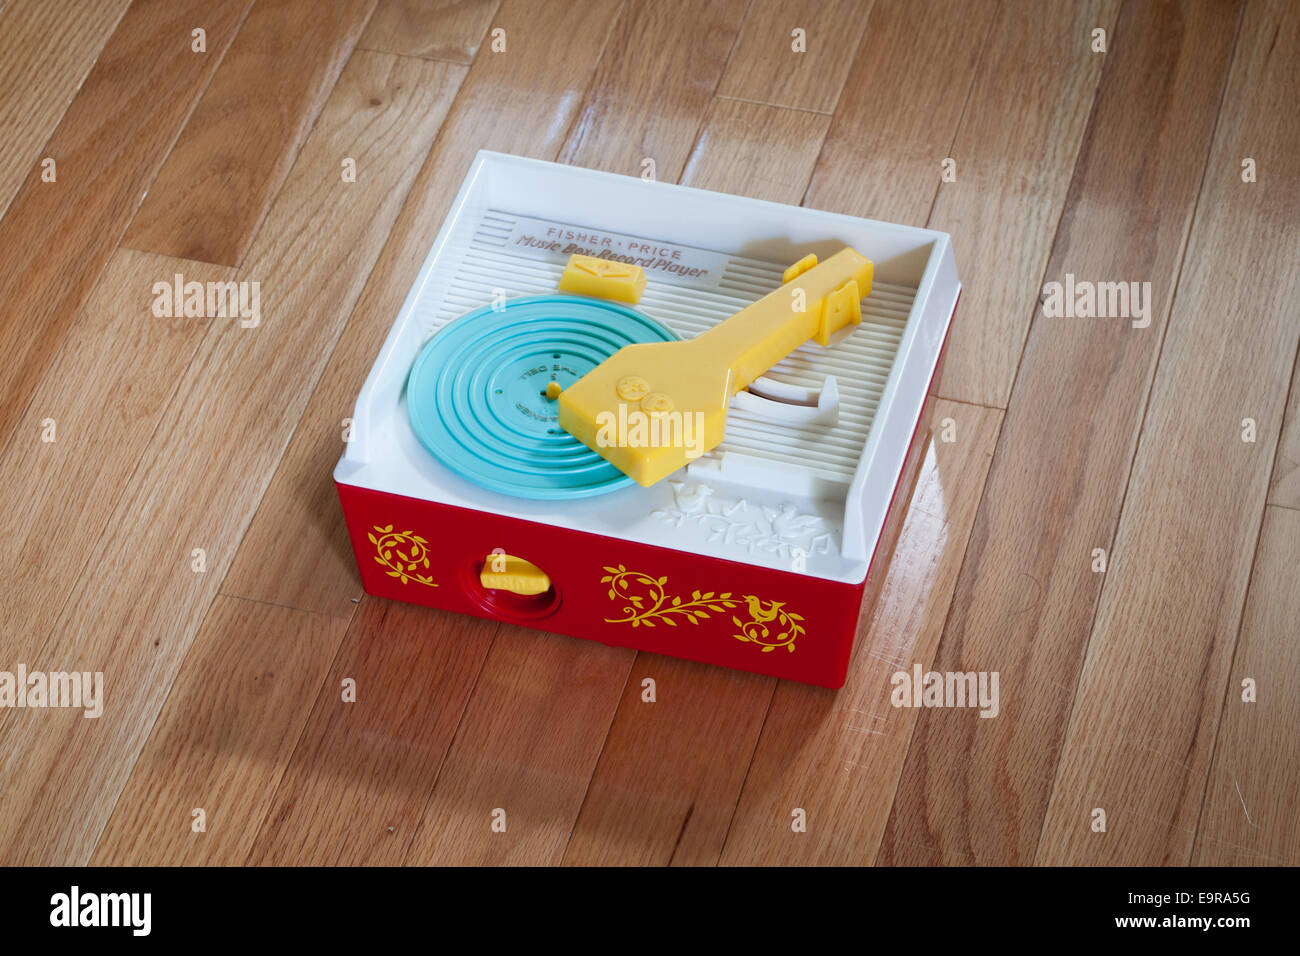 A Fisher-Price Classic Record Player (Fisher Price Change-A-Record Music Box  Stock Photo - Alamy